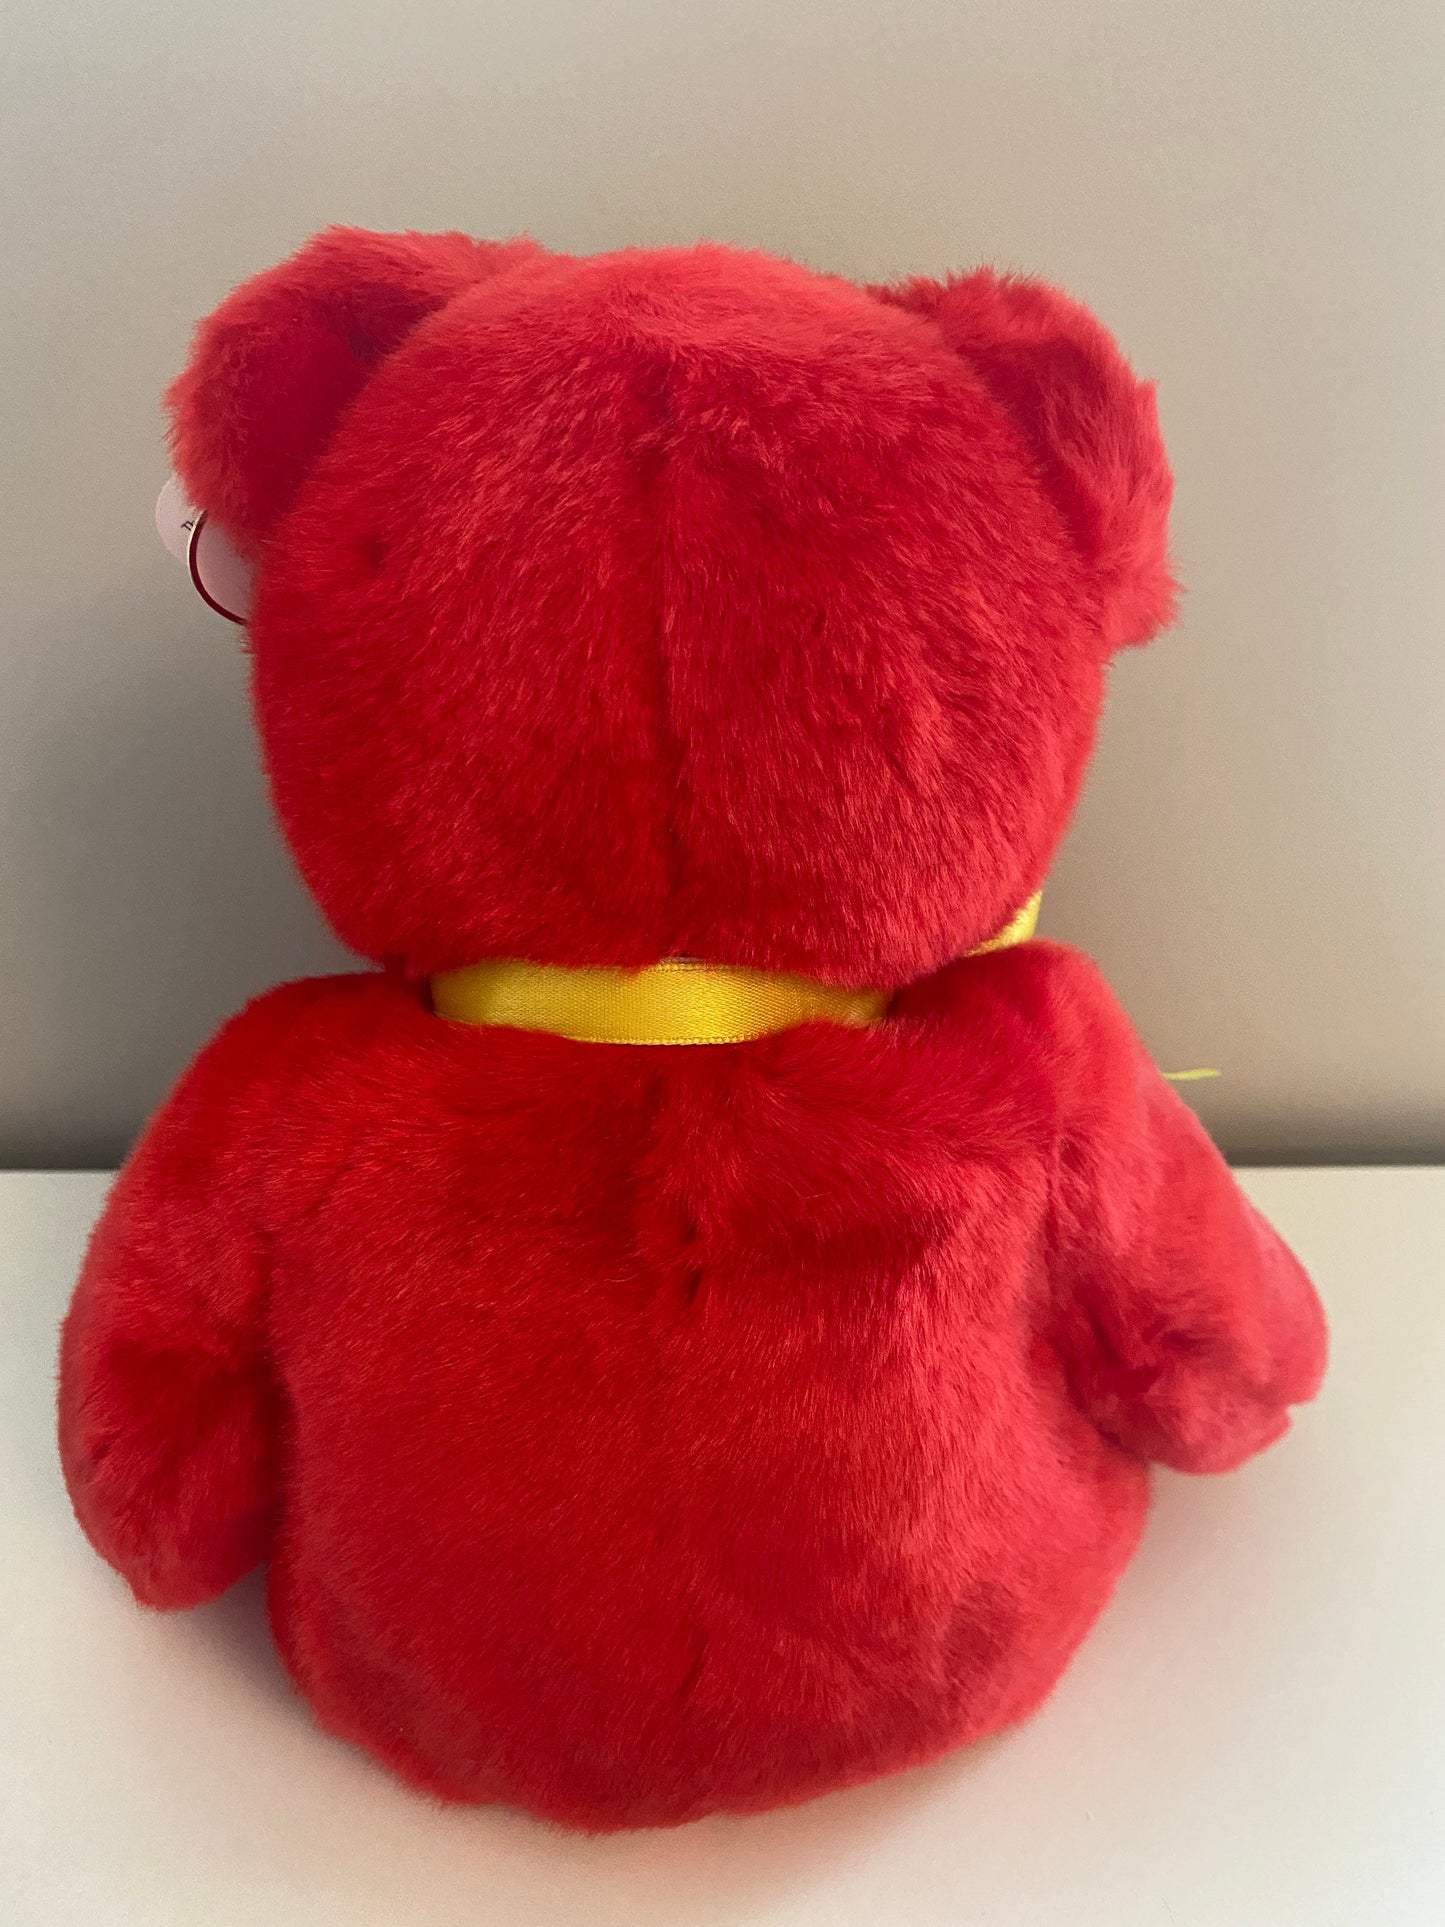 Ty Beanie Buddy “Osito” the Red Mexican Bear Plush (14 inch)